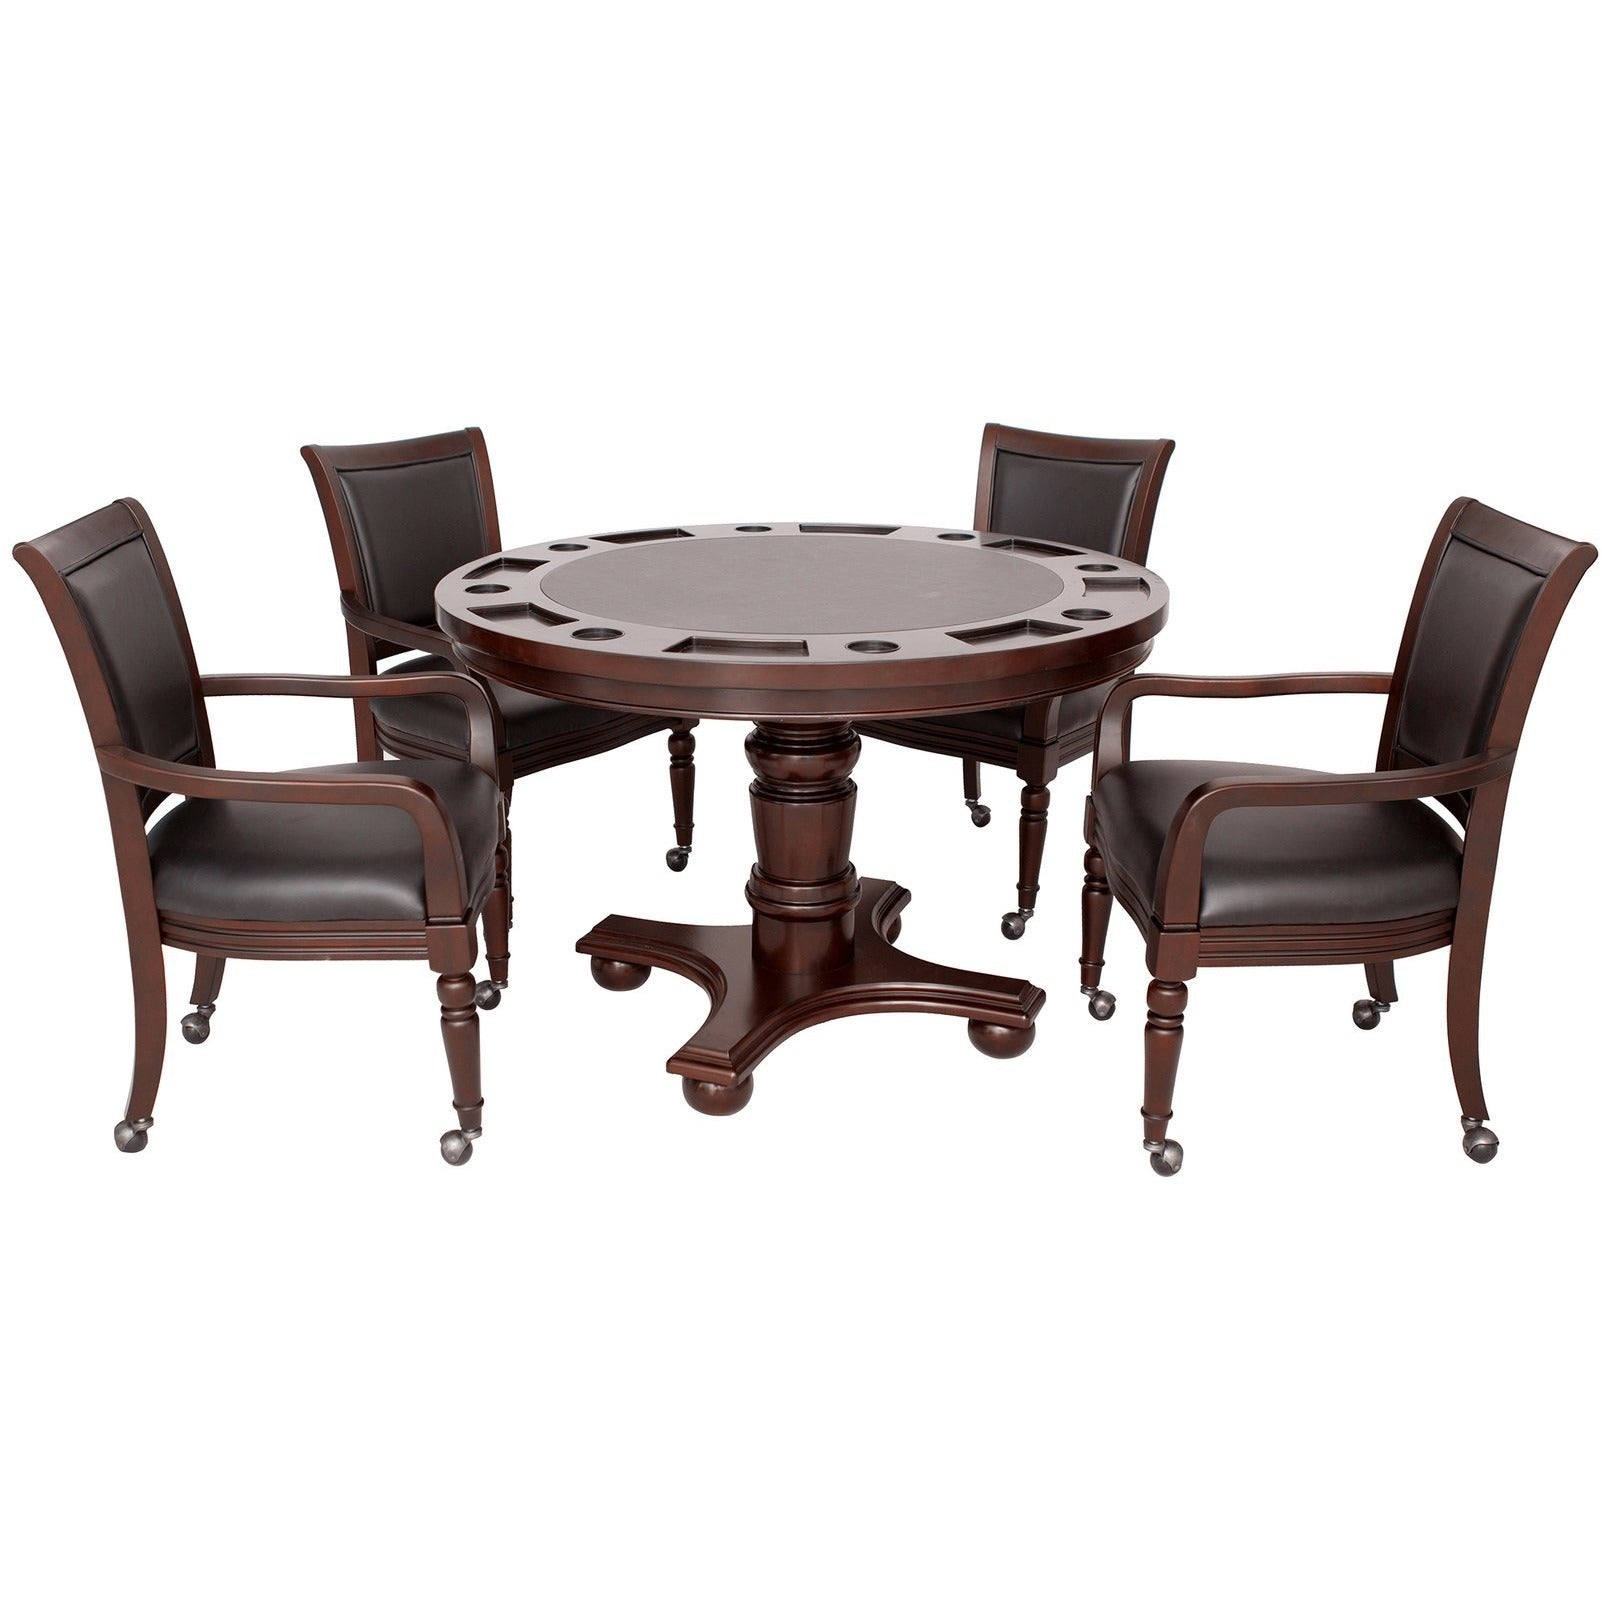 Hathaway Bridgeport Walnut Round Poker Dining Table with 4 Arm Chairs - Gaming Blaze